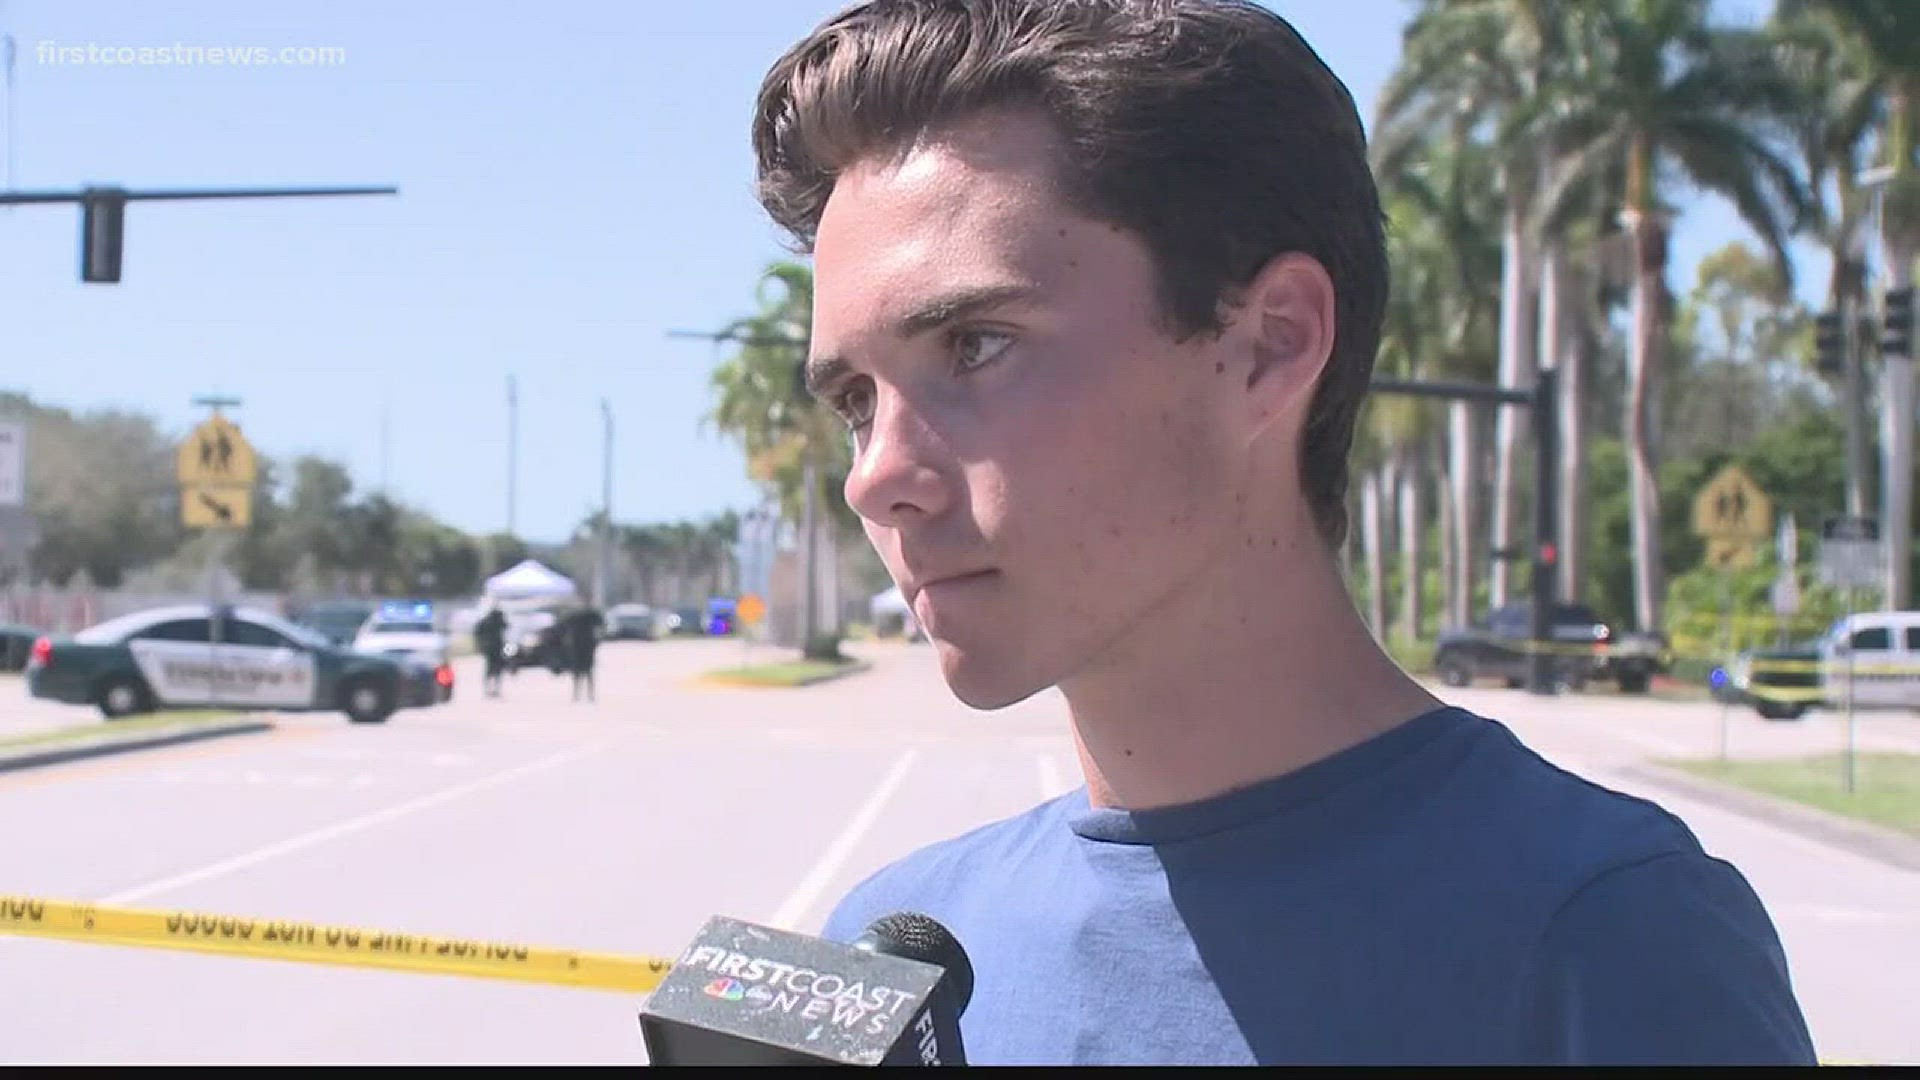 A Parkland student is calling for change after a gunman killed 17 people at Marjory Stoneman Douglas High School.